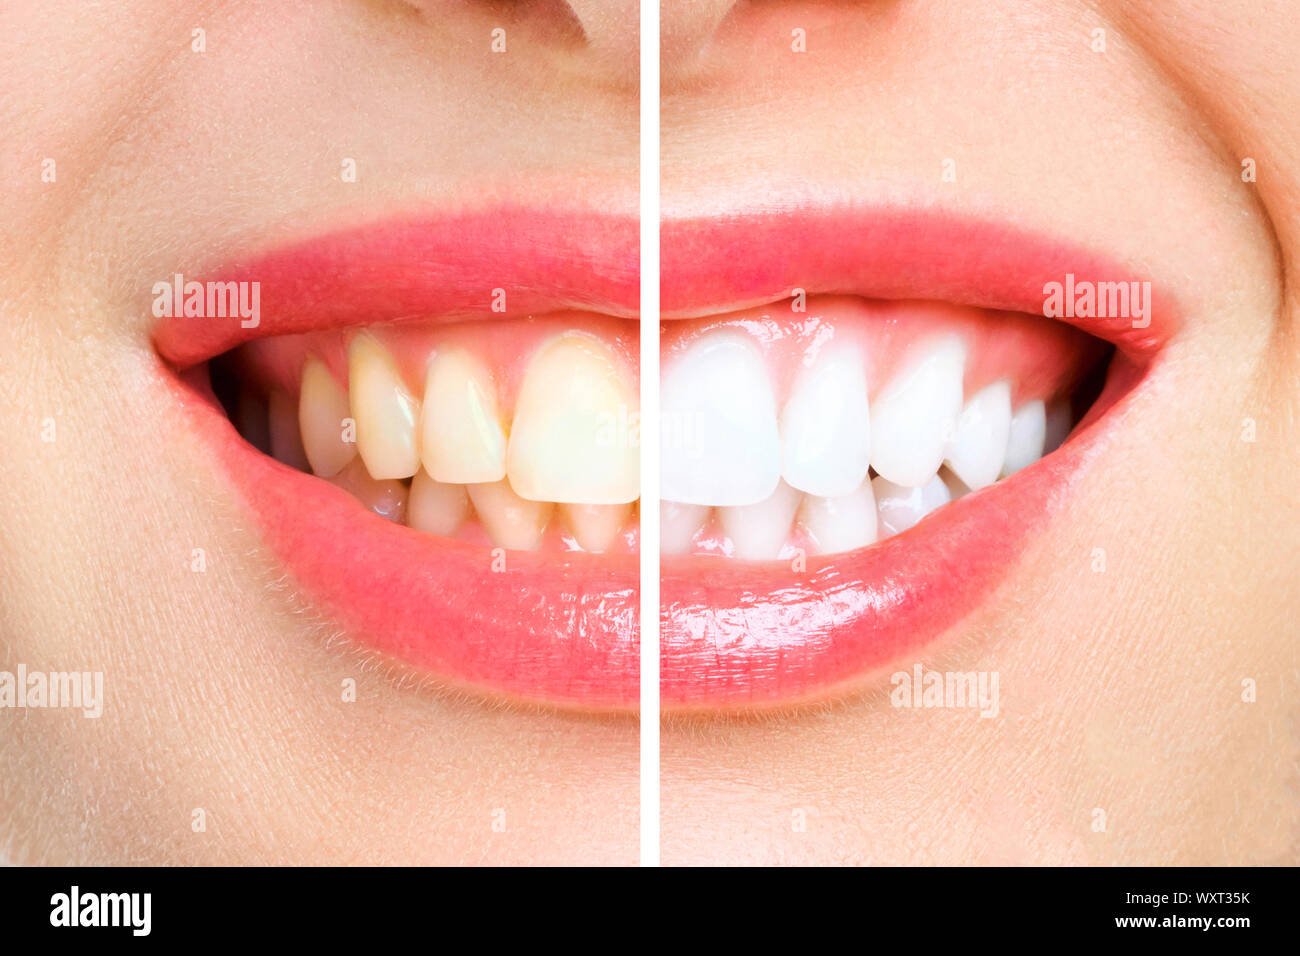 woman teeth before and after whitening. Over white background Stock Photo